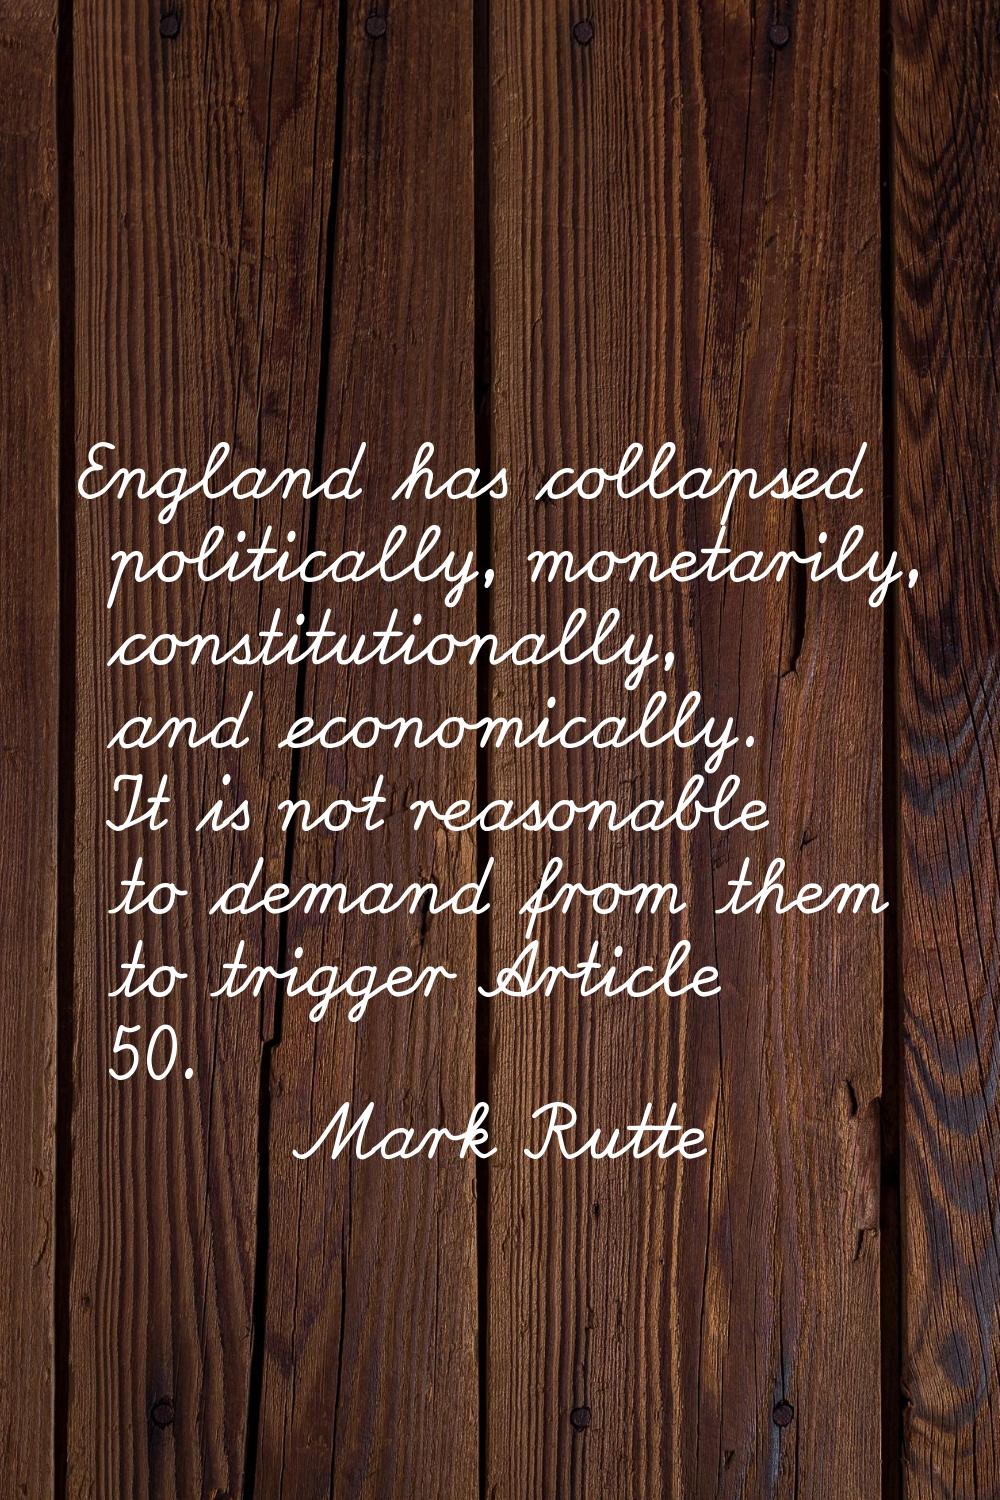 England has collapsed politically, monetarily, constitutionally, and economically. It is not reason